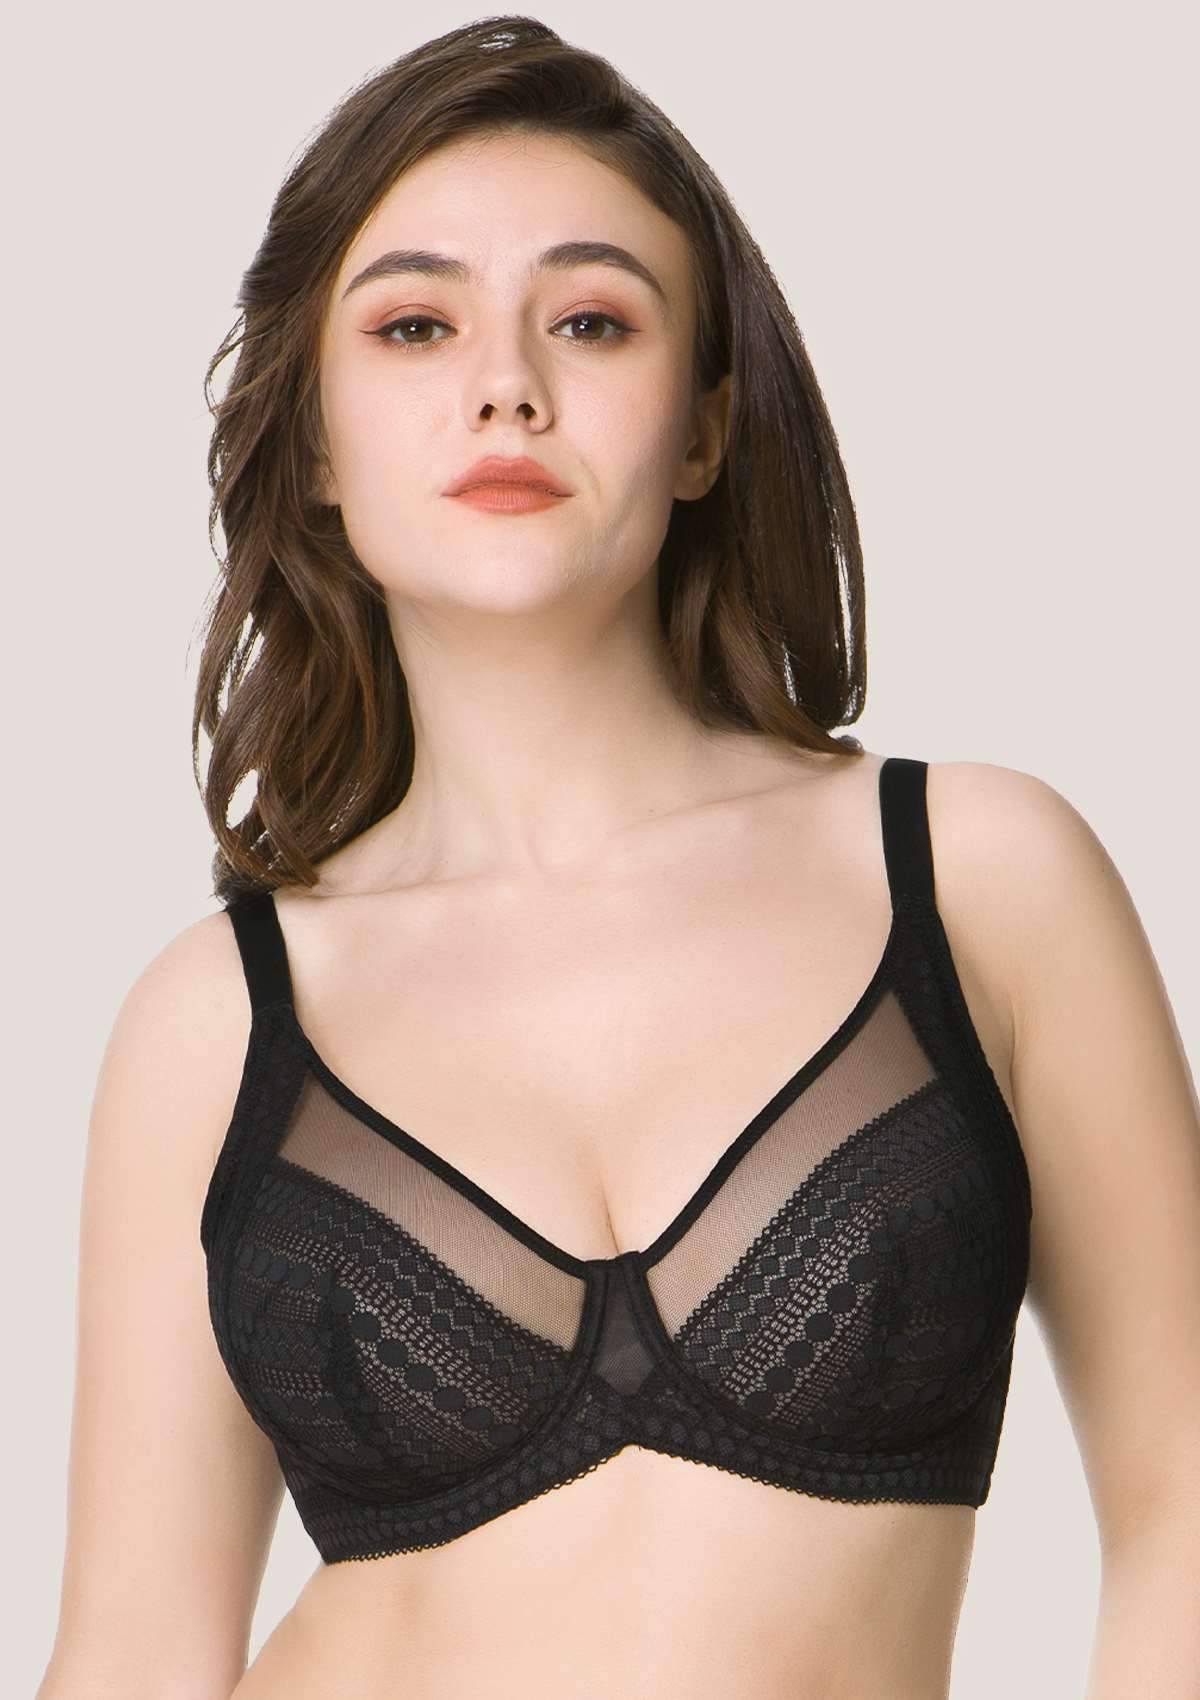 HSIA Heroine Matching Bra And Panties: Unlined Lace Unpadded Bra - Black / 42 / D